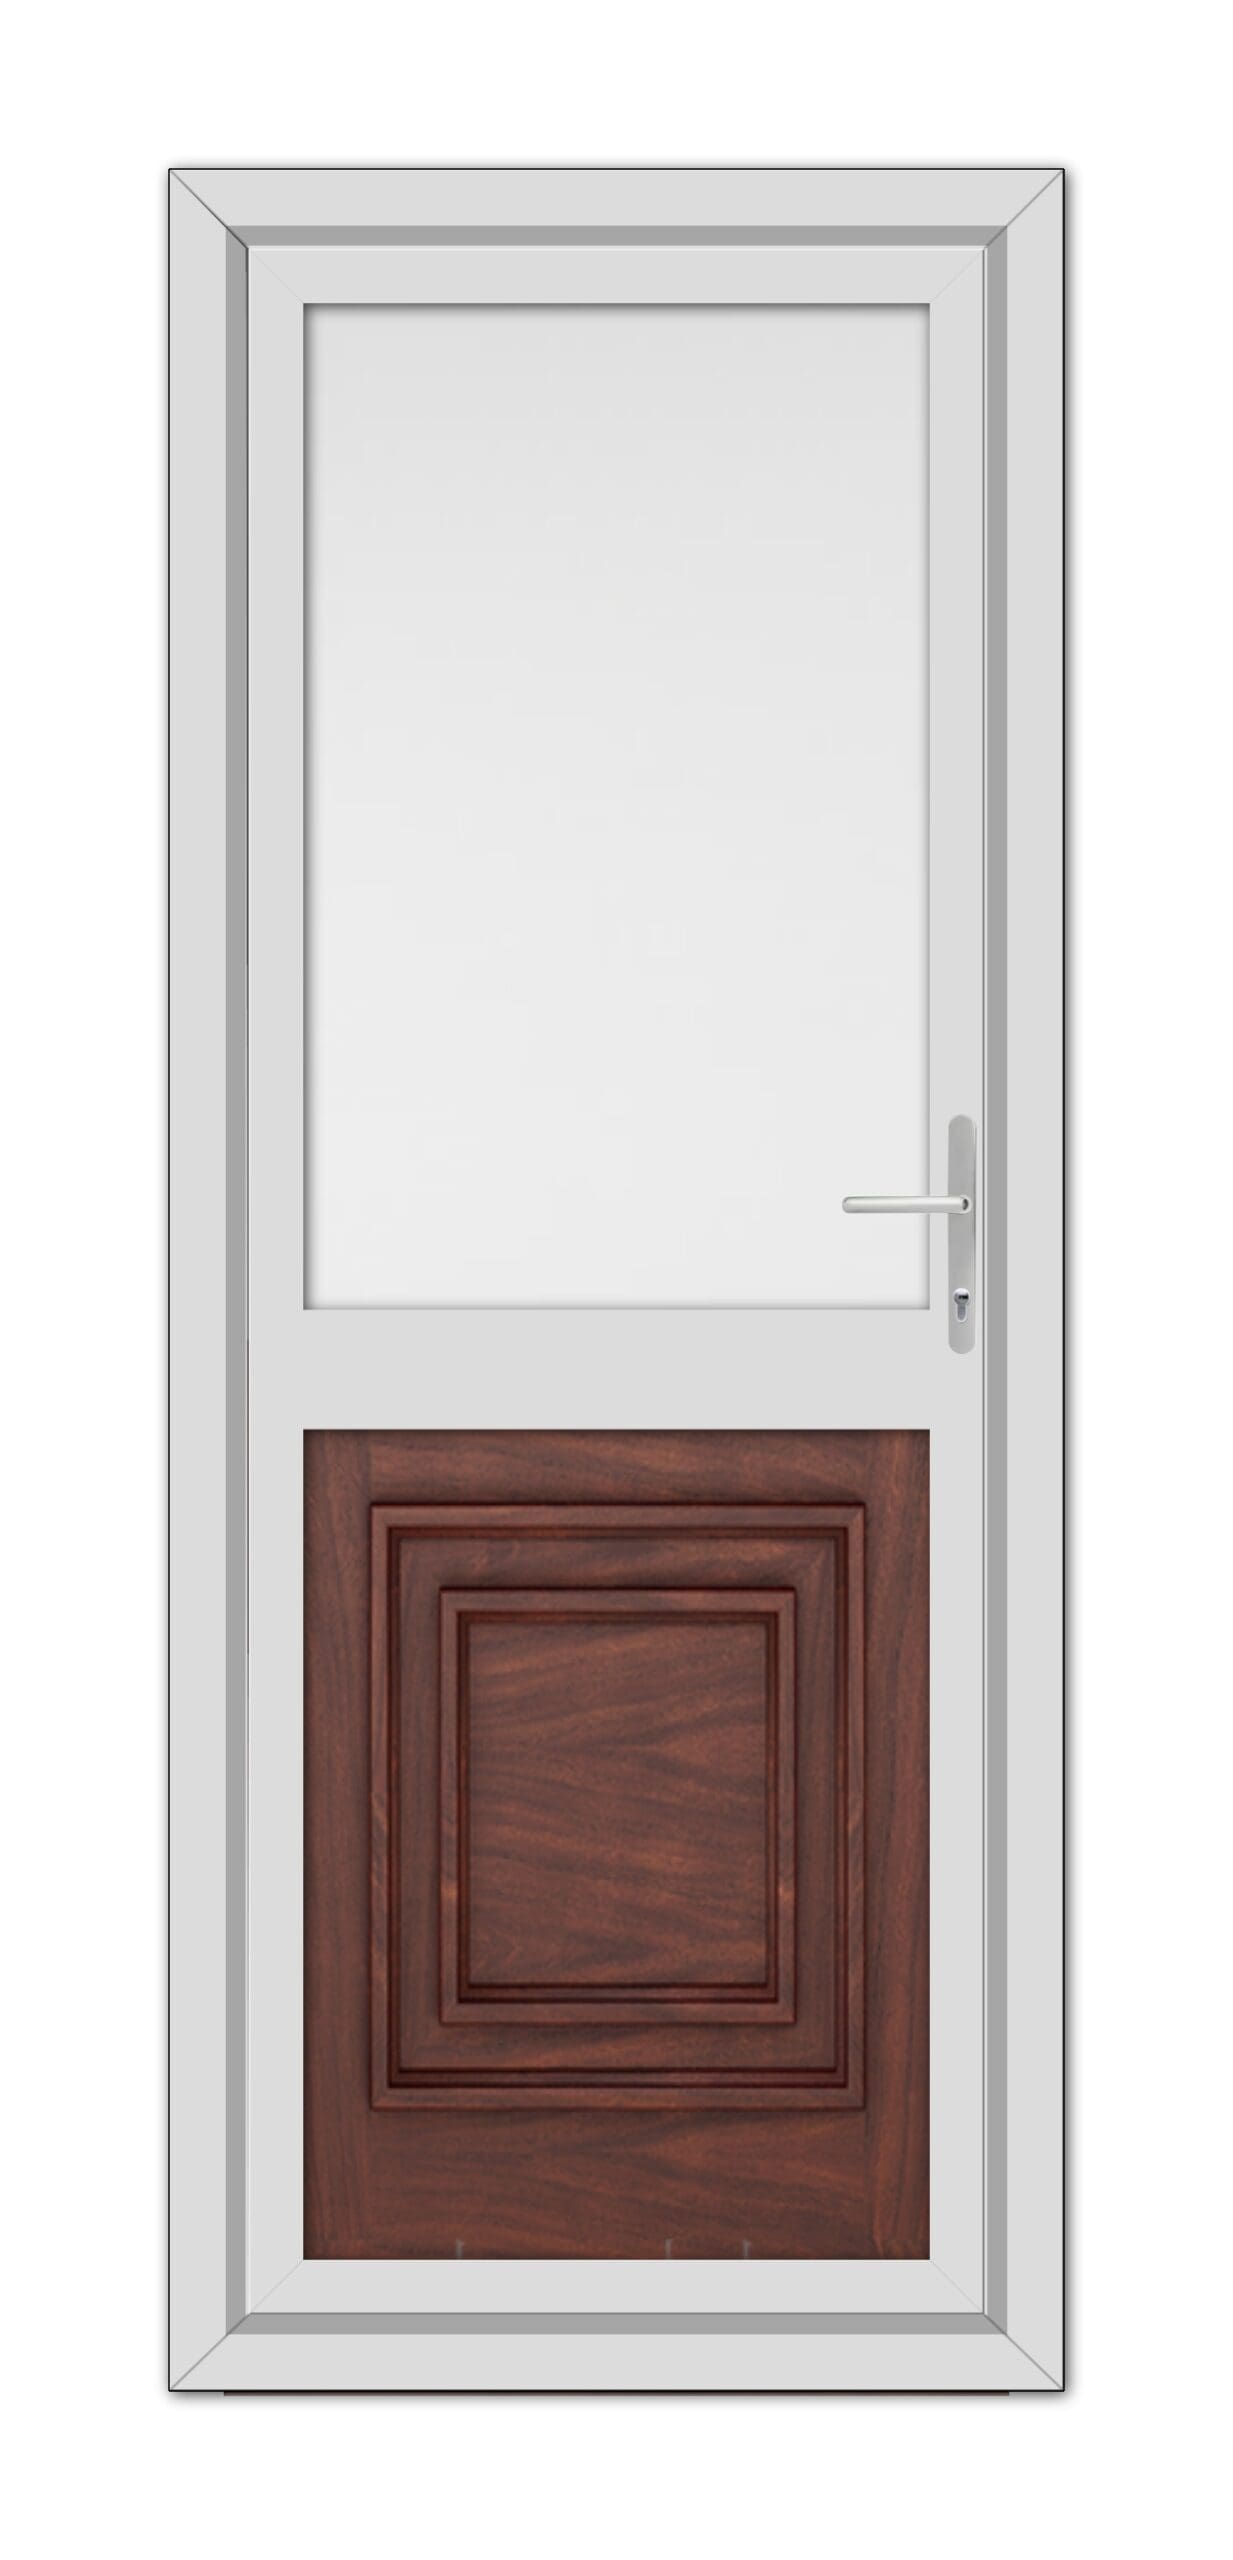 A Rosewood Hannover Half uPVC Back Door with a white frame featuring a top glass panel and a lower wooden panel, equipped with a metal handle.